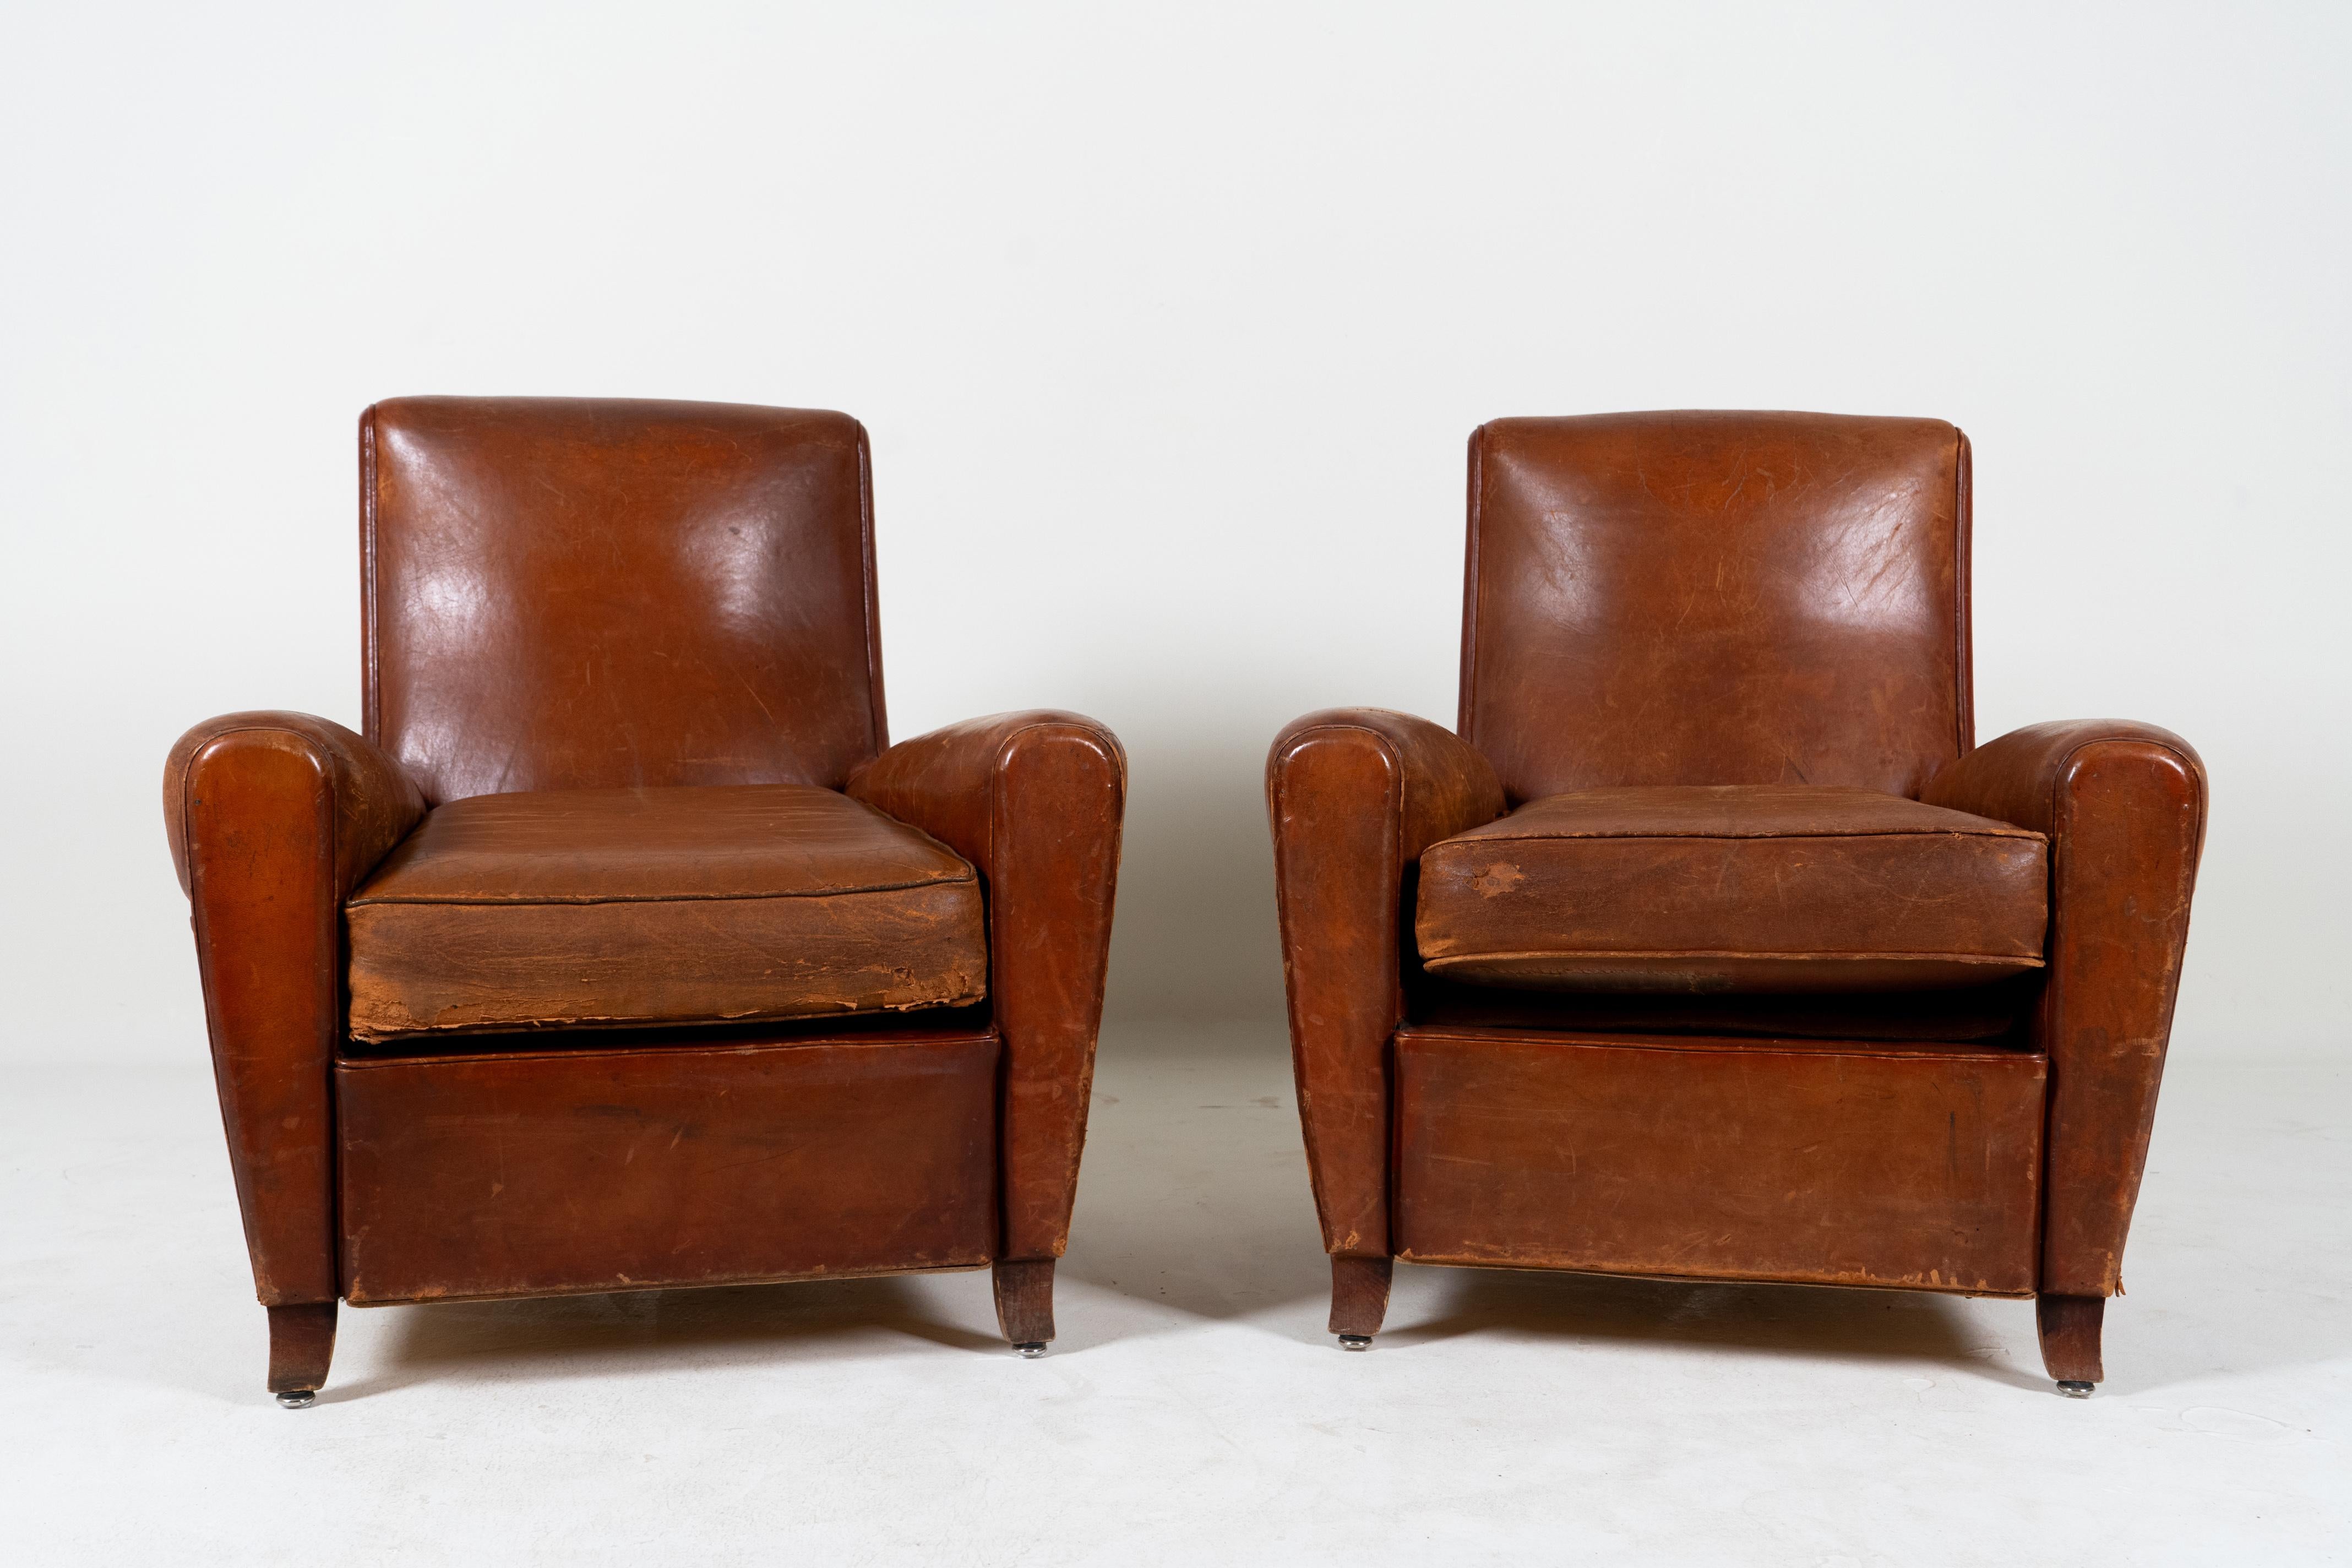 These gracefully-proportioned French leather club chairs have  classic Art Deco lines with restrained curves and gently sloping backs.  The chairs are comfortable and inviting and perfectly sized to accommodate the greatest range of people. The lamb